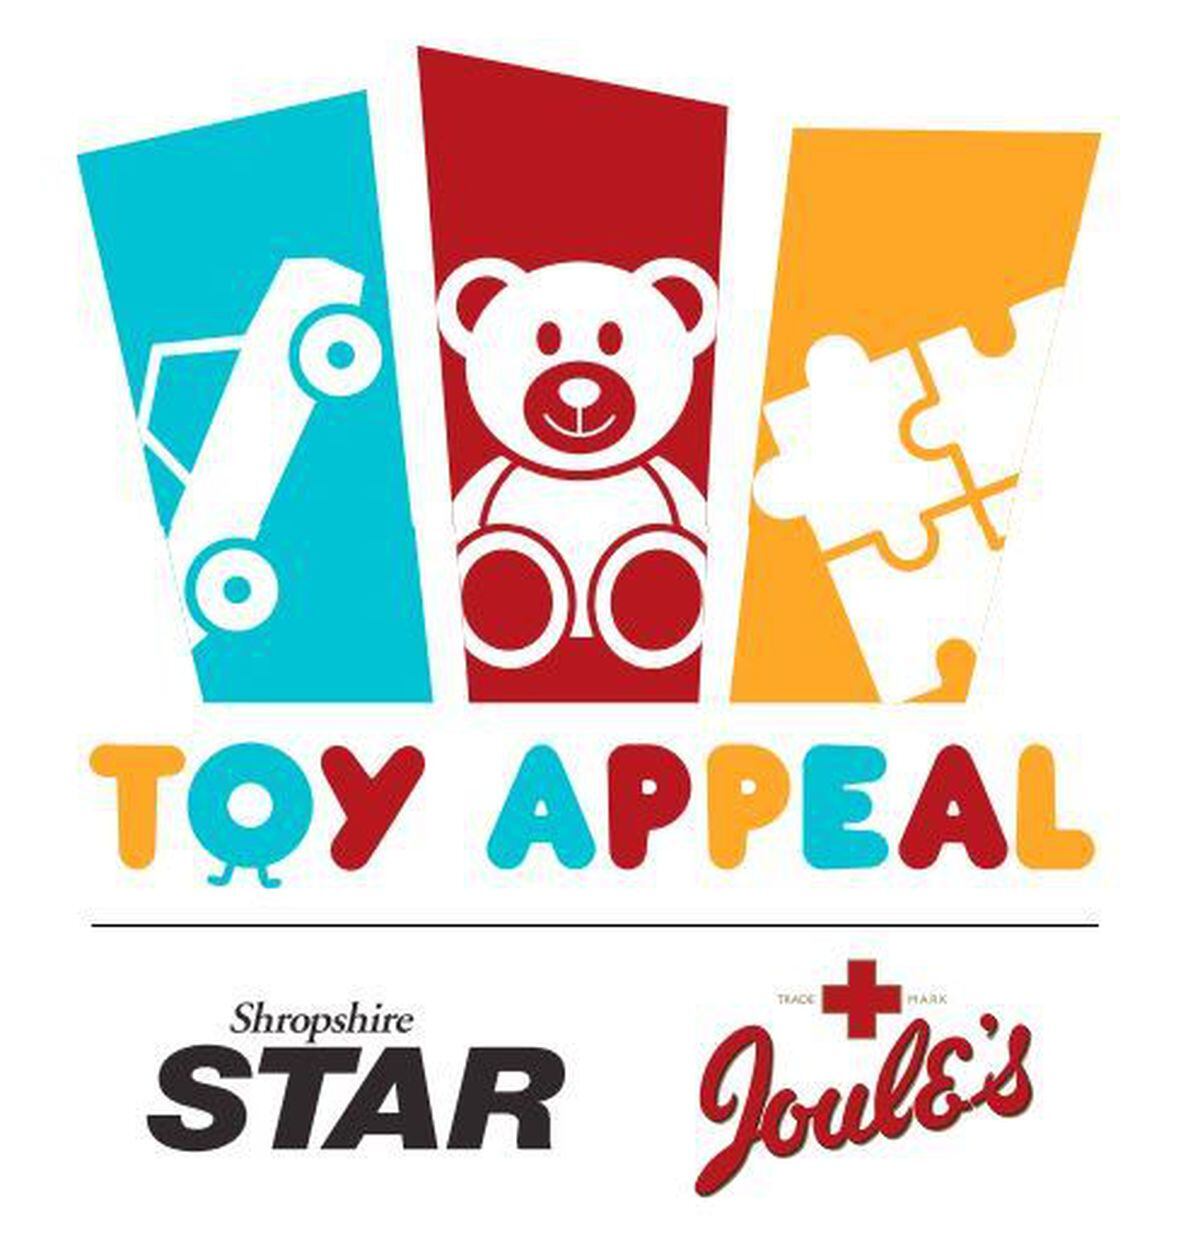 Shropshire Star and Joule's Christmas Toy Appeal